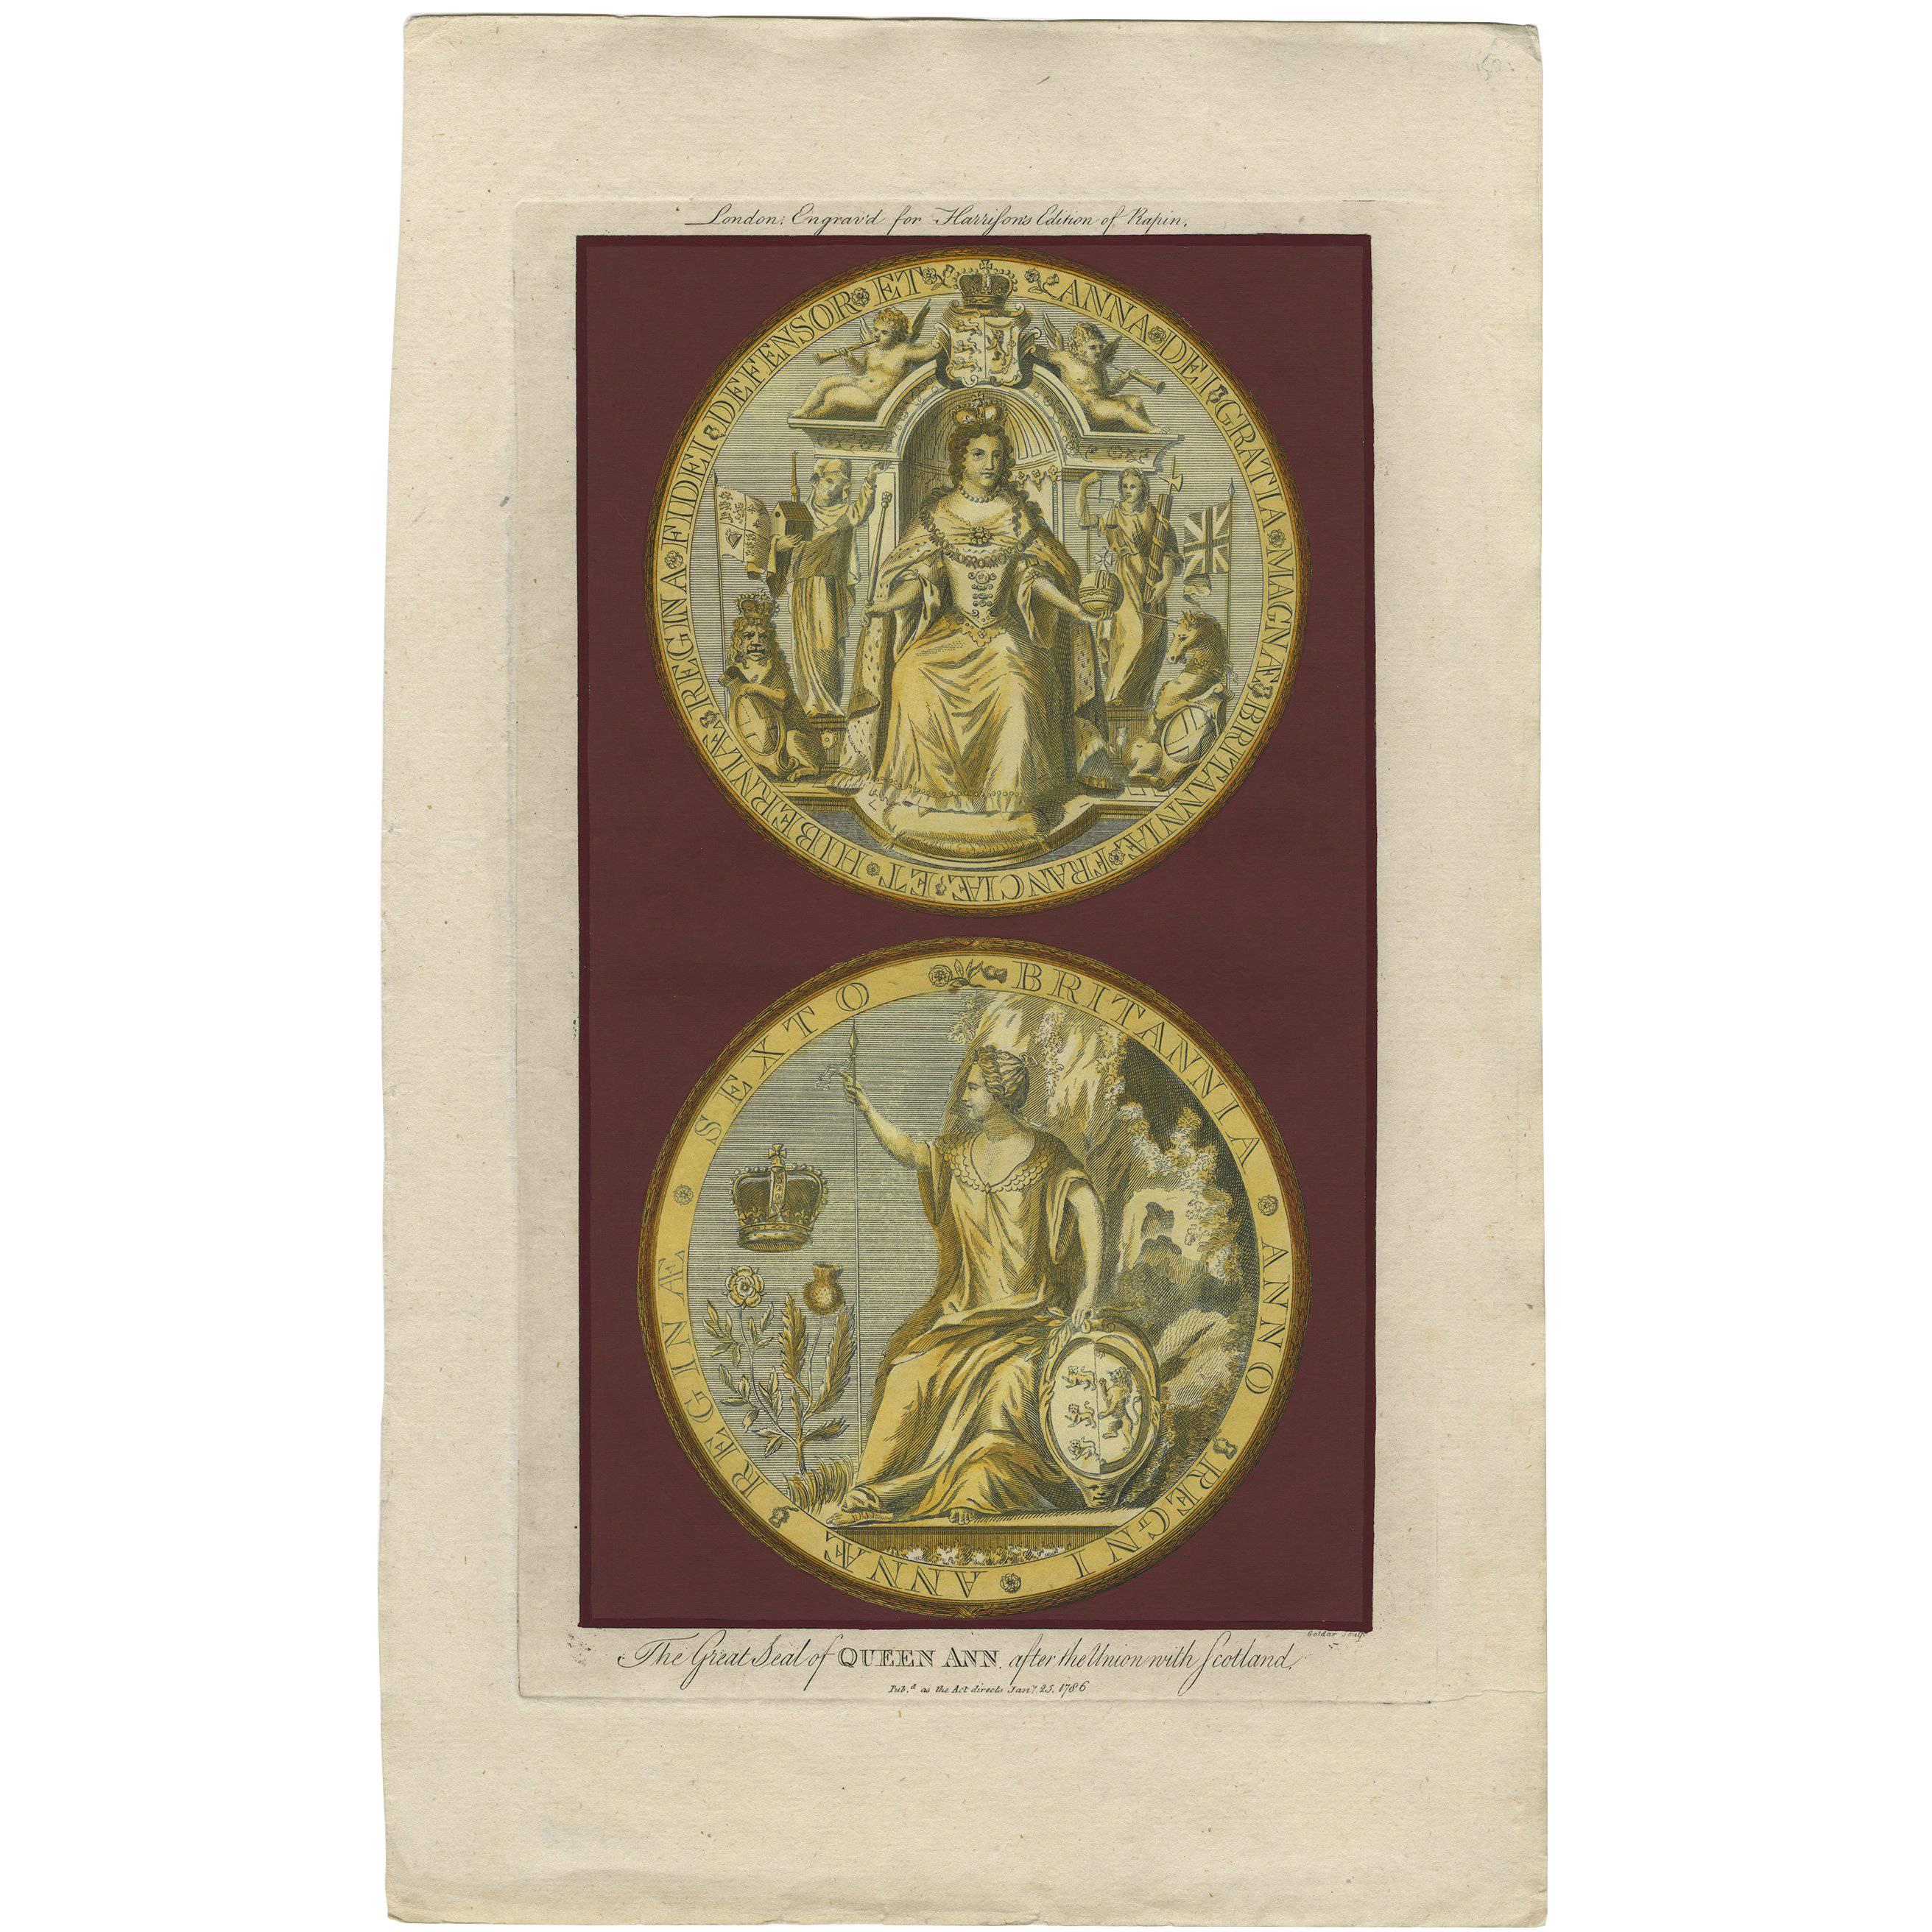 Antique Print of the Great Seal of Queen Anne by Harrison (1789)